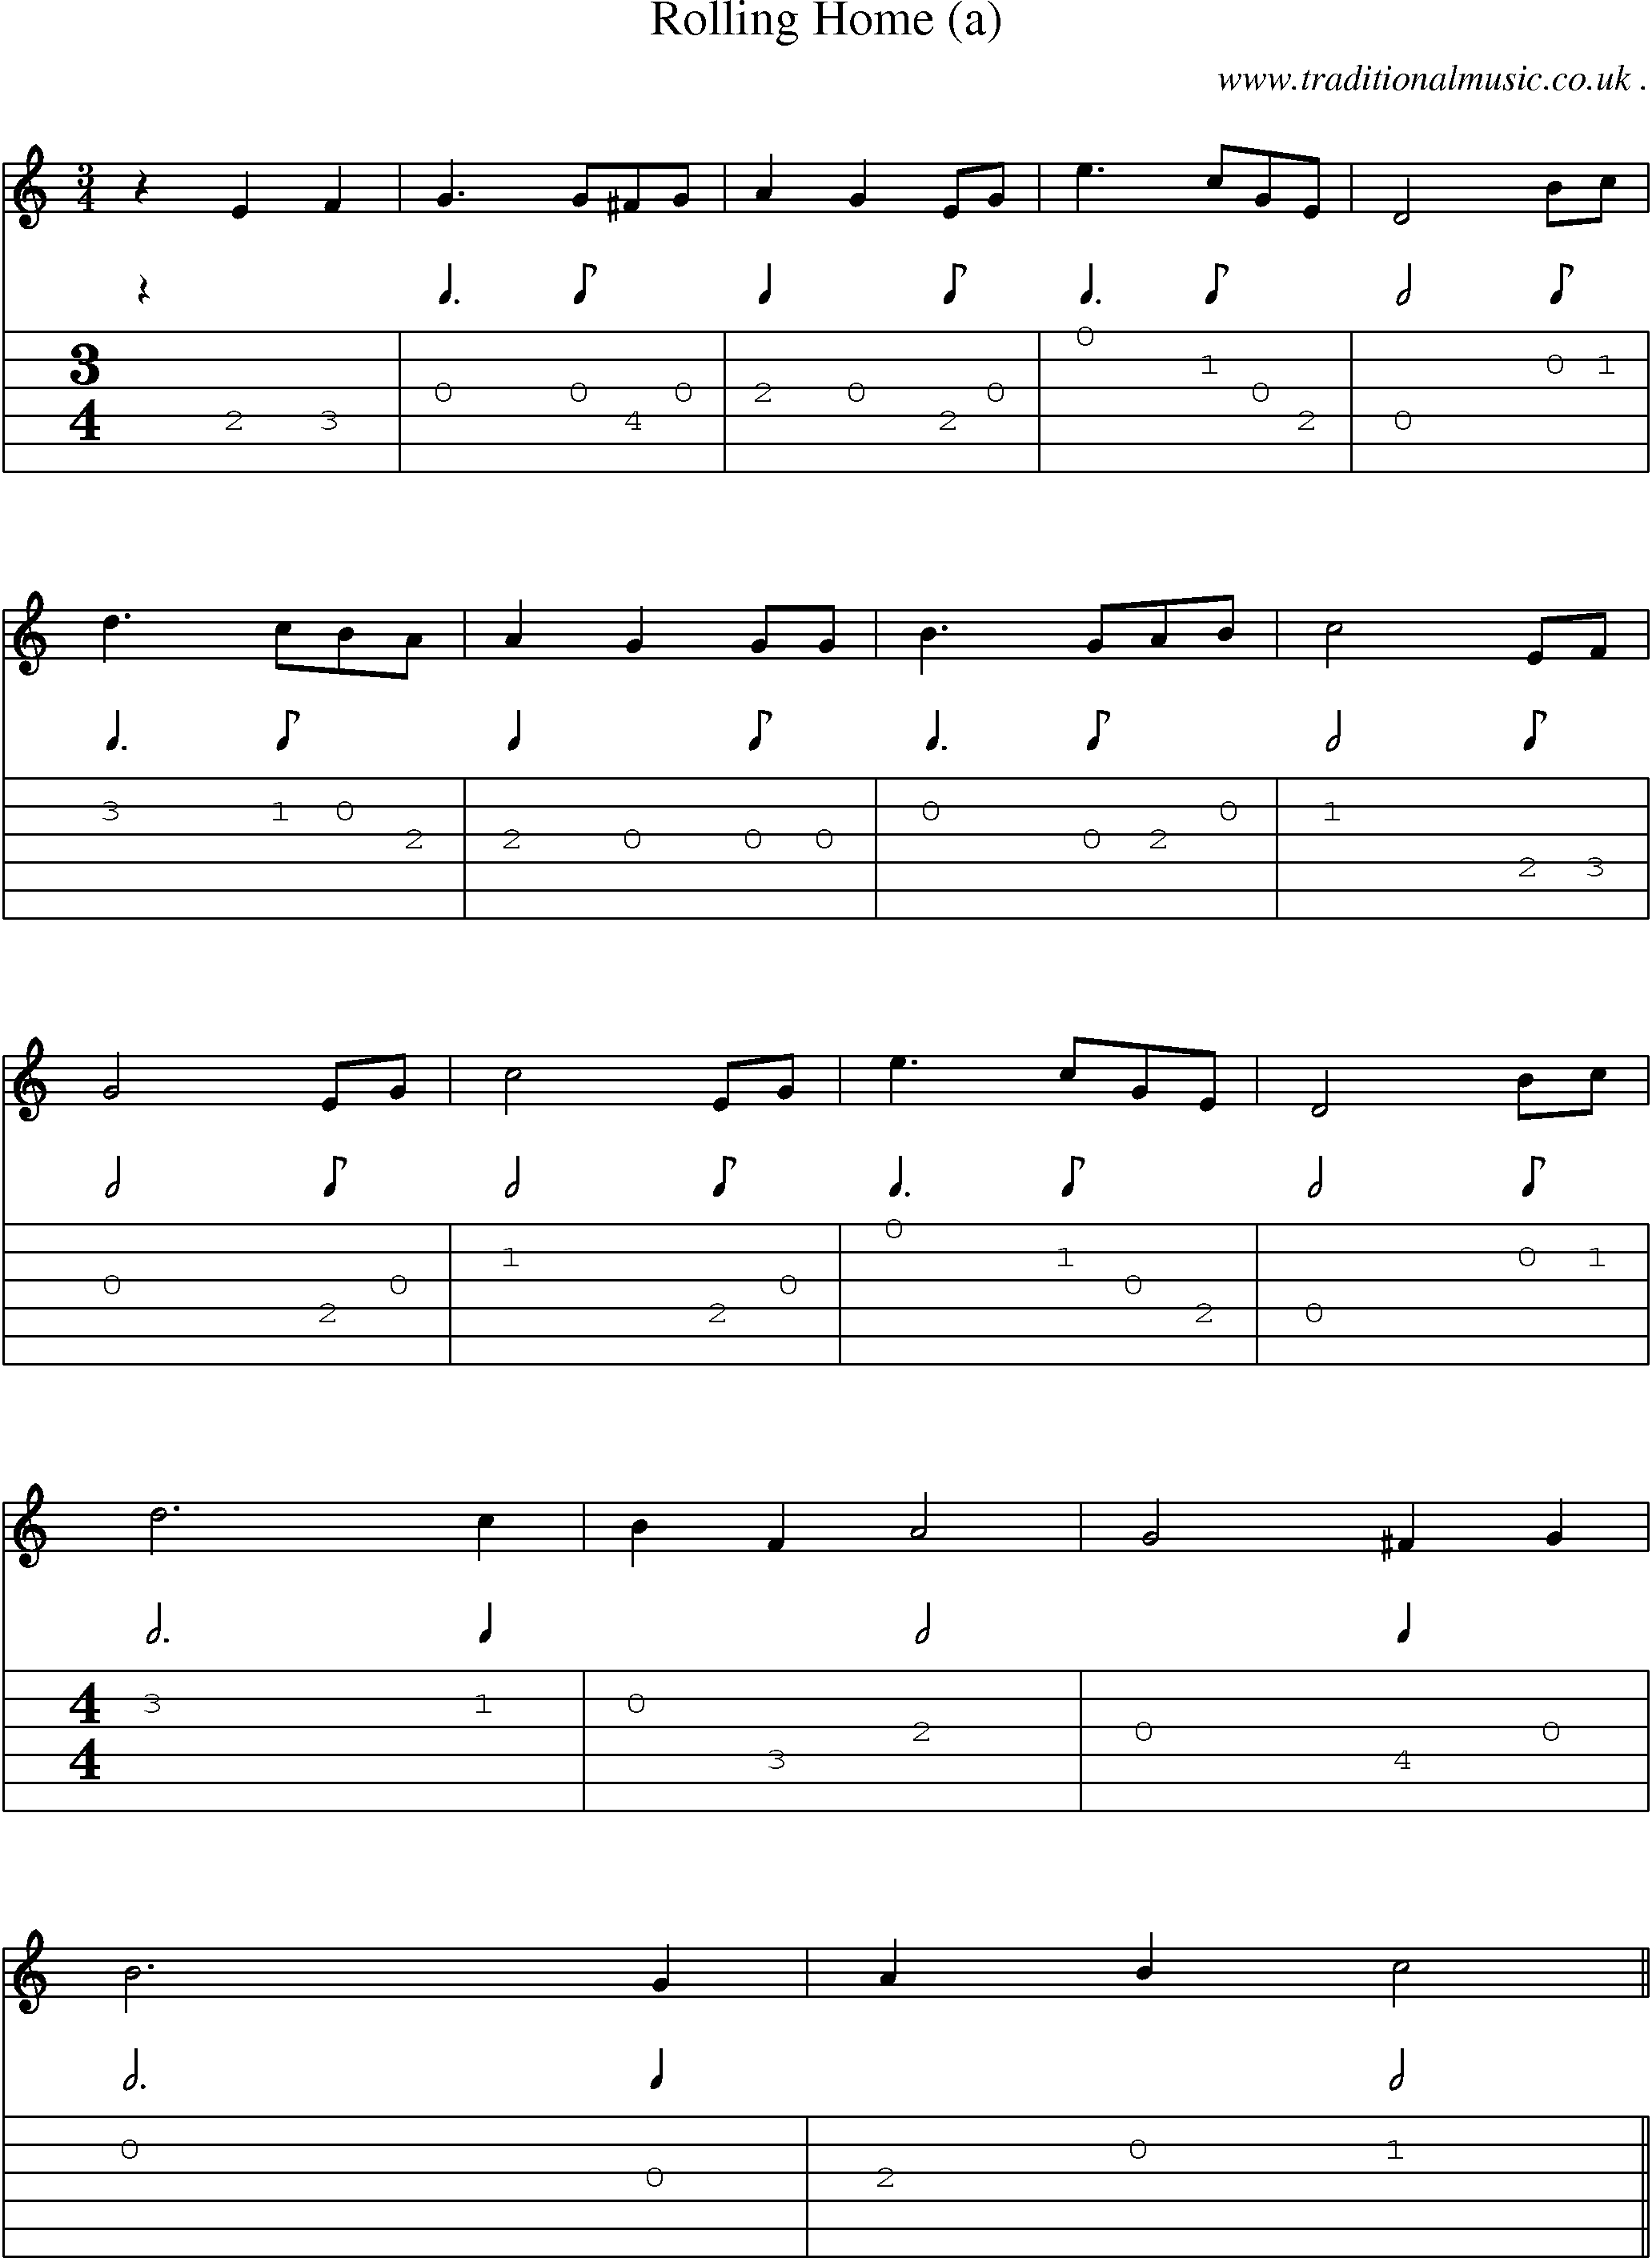 Sheet-Music and Guitar Tabs for Rolling Home (a)